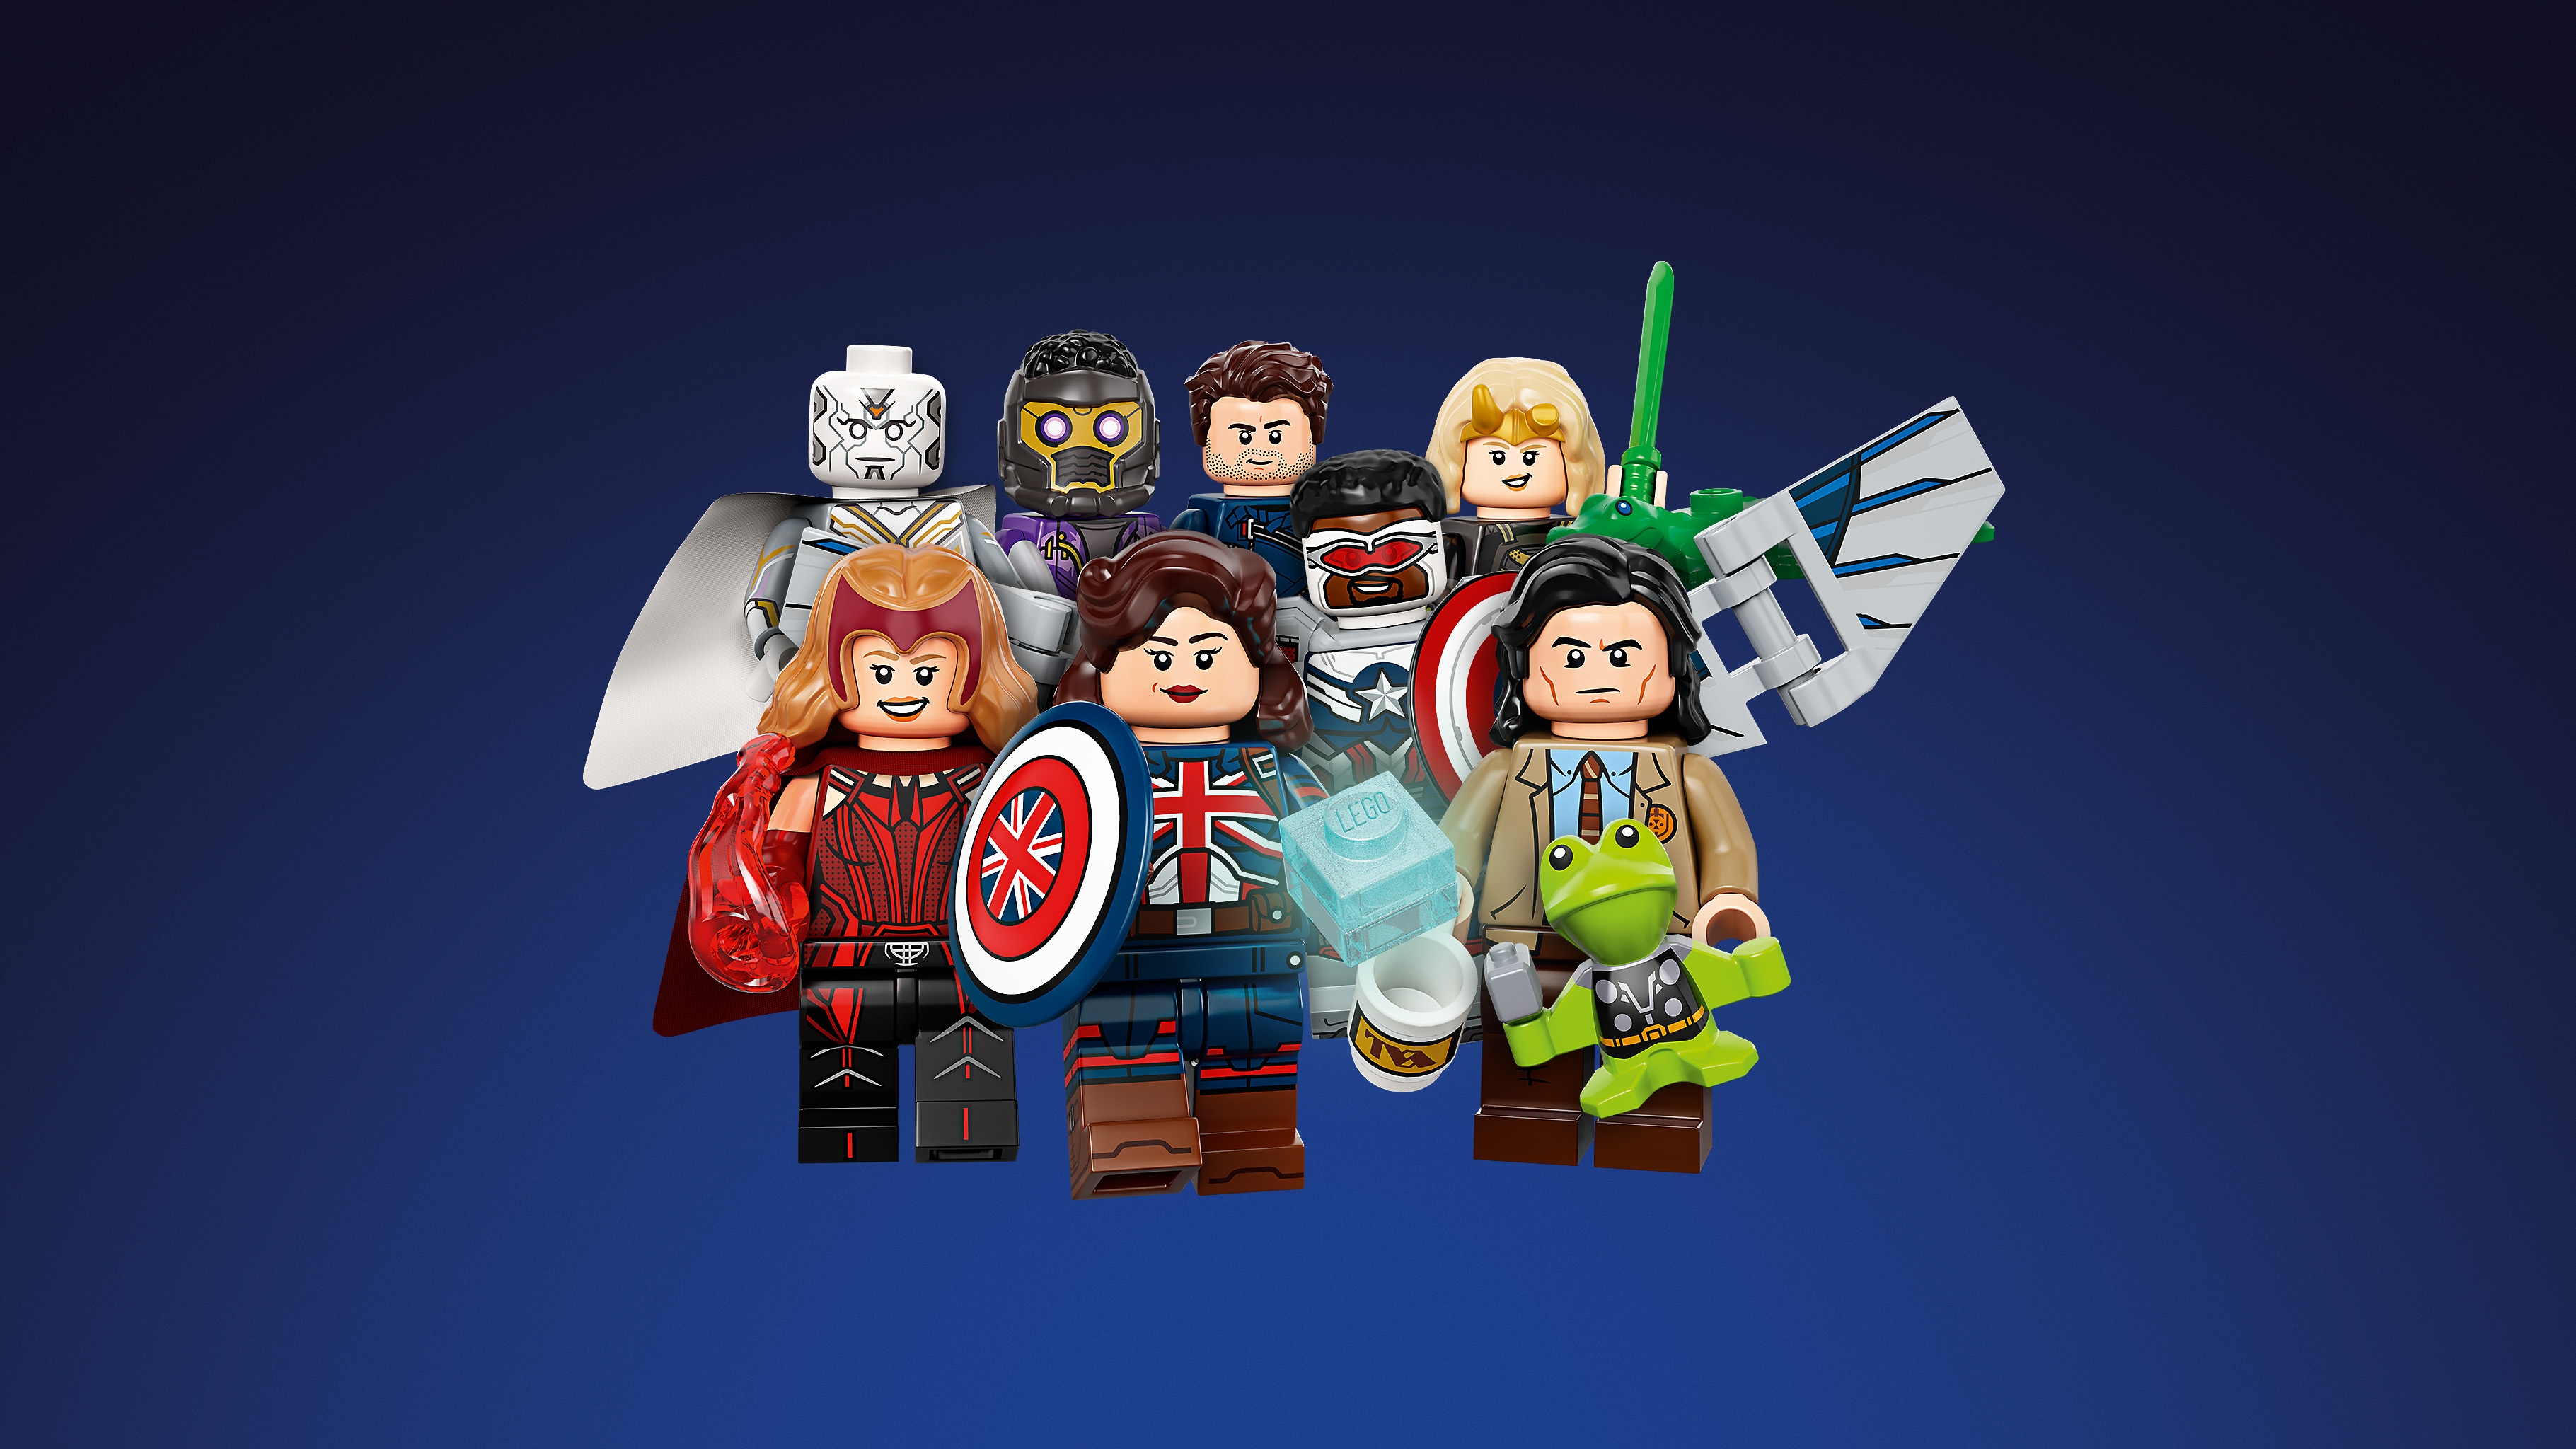 LEGO Marvel Superheroes What If? Set 71031 Choose Your Own Minifigure!